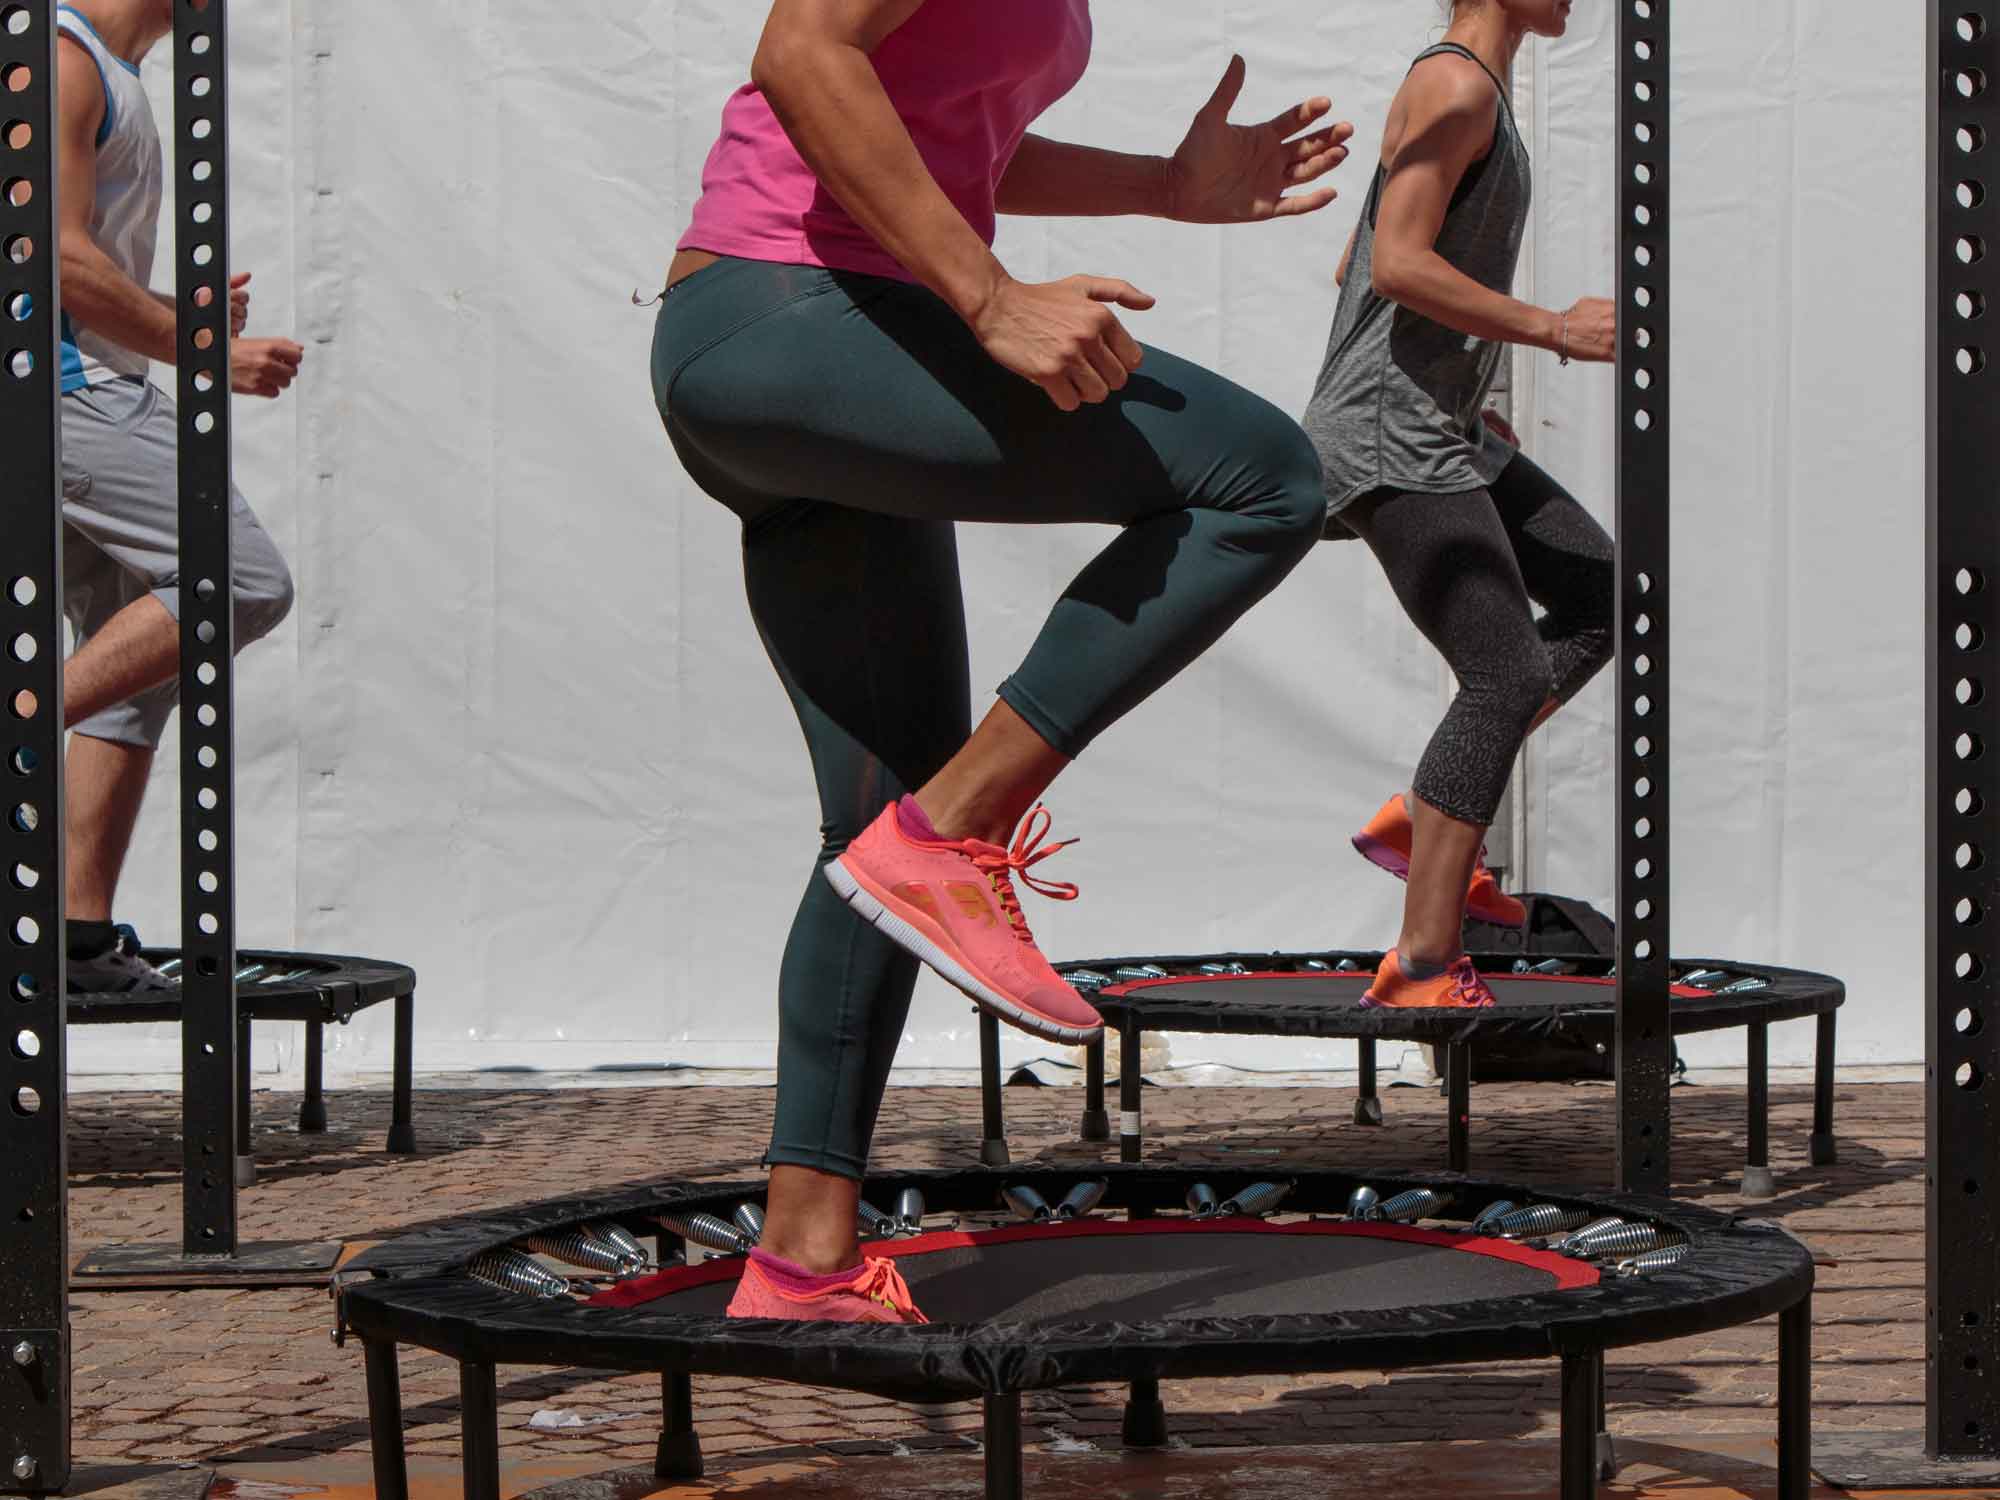 levering Het formulier Wegenbouwproces How Many Calories Do You Burn Jumping On A Trampoline? - The Jump Central